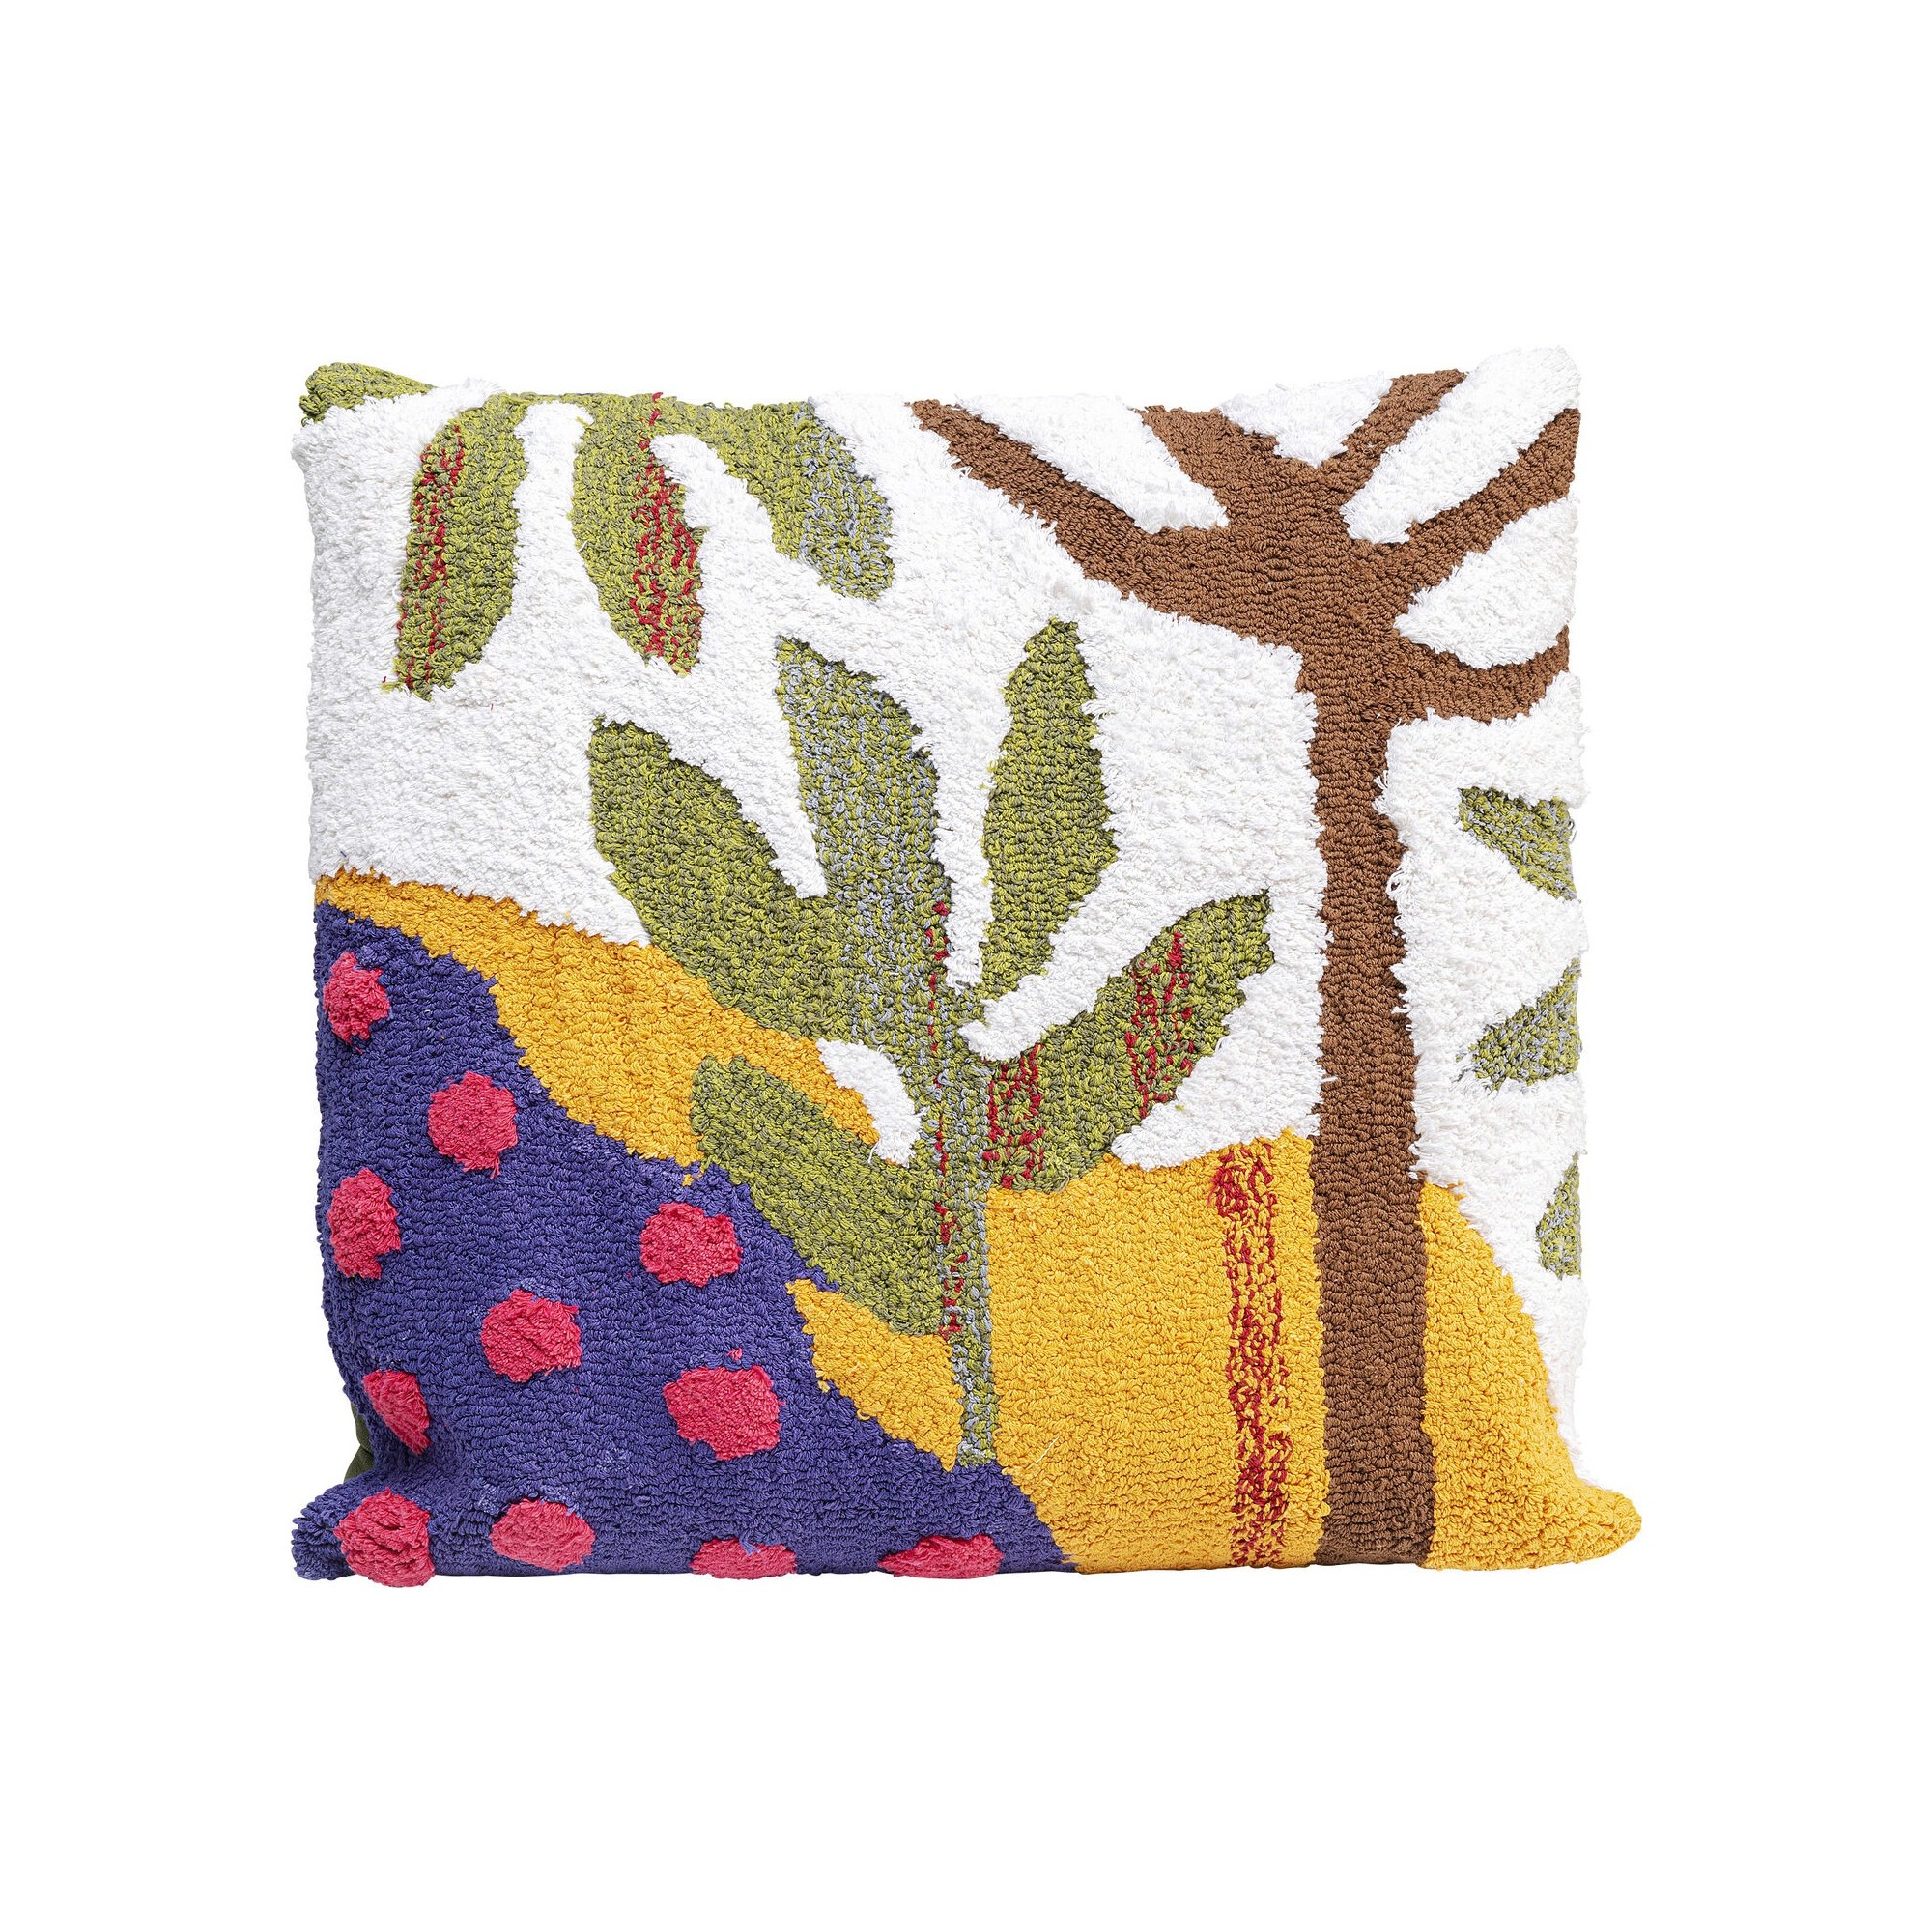 Coussin Tufted Trees 50x50cm